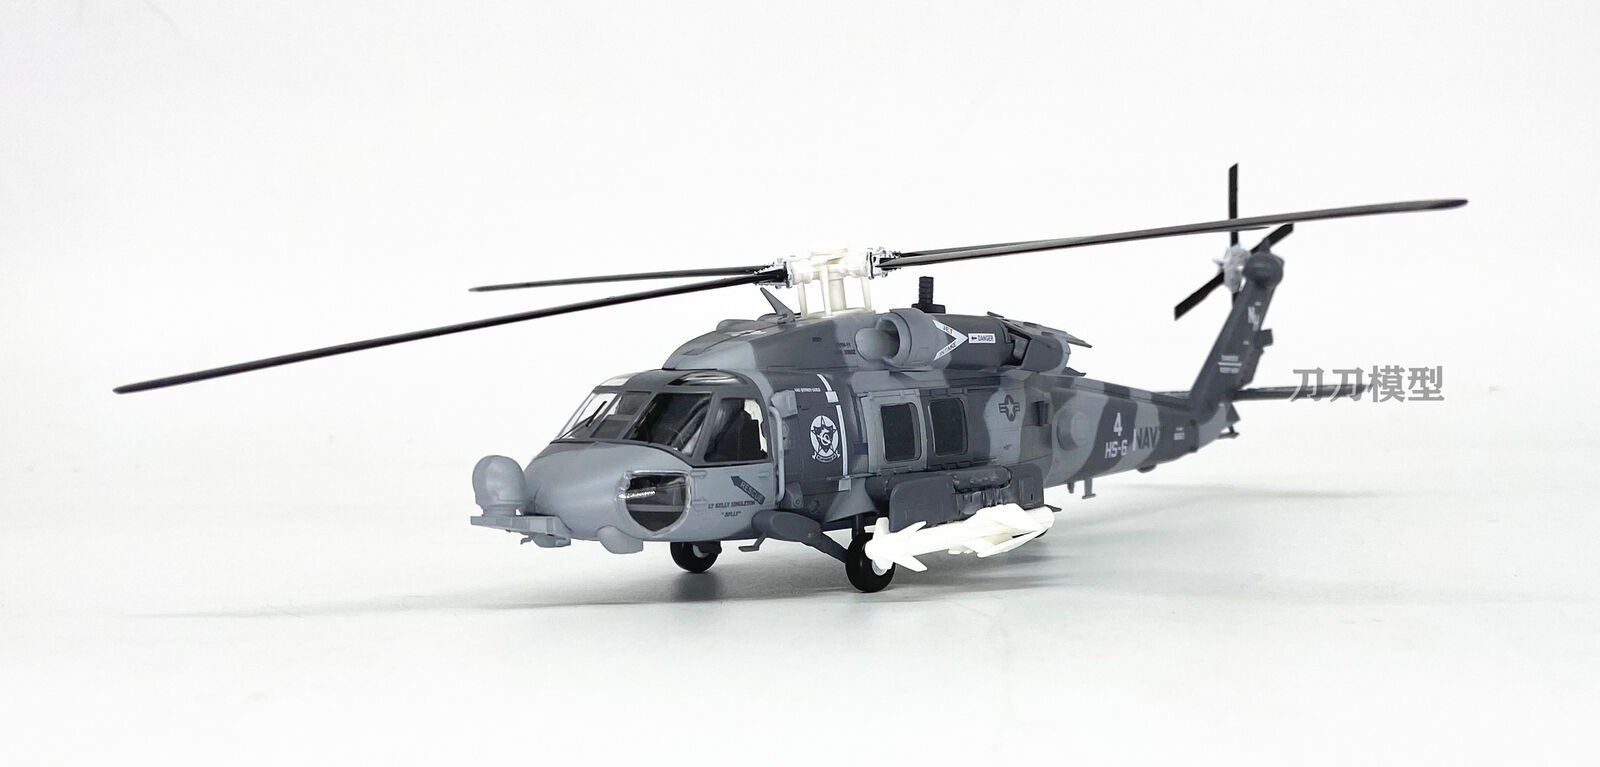 1:72 US HH-60H Pavement Hawk Helicopter Aircraft Model static Model new